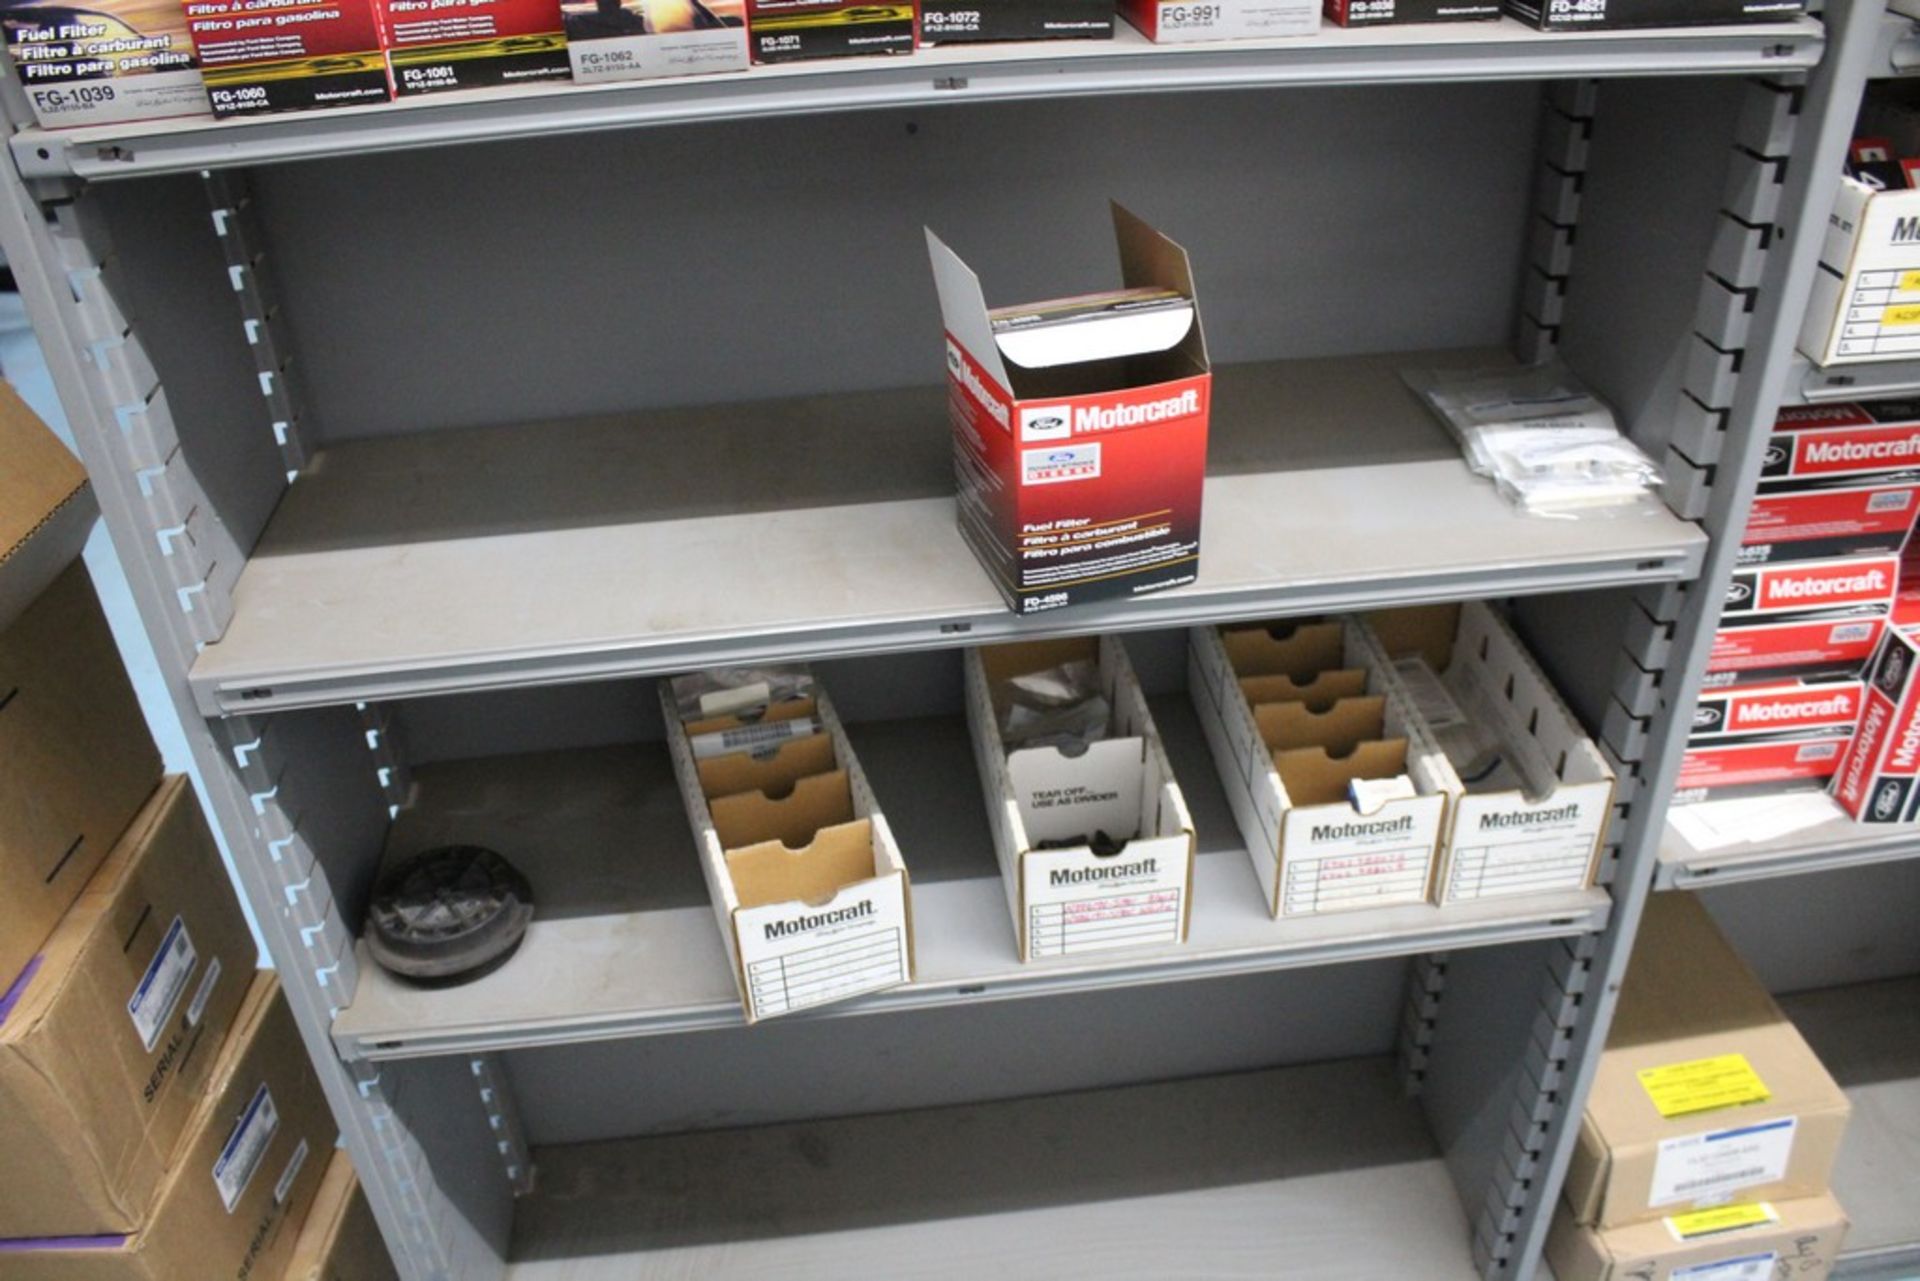 ASSORTED MOTORCRAFT FUEL FILTERS AND PARTS ON (4) SHELVES - Image 3 of 3